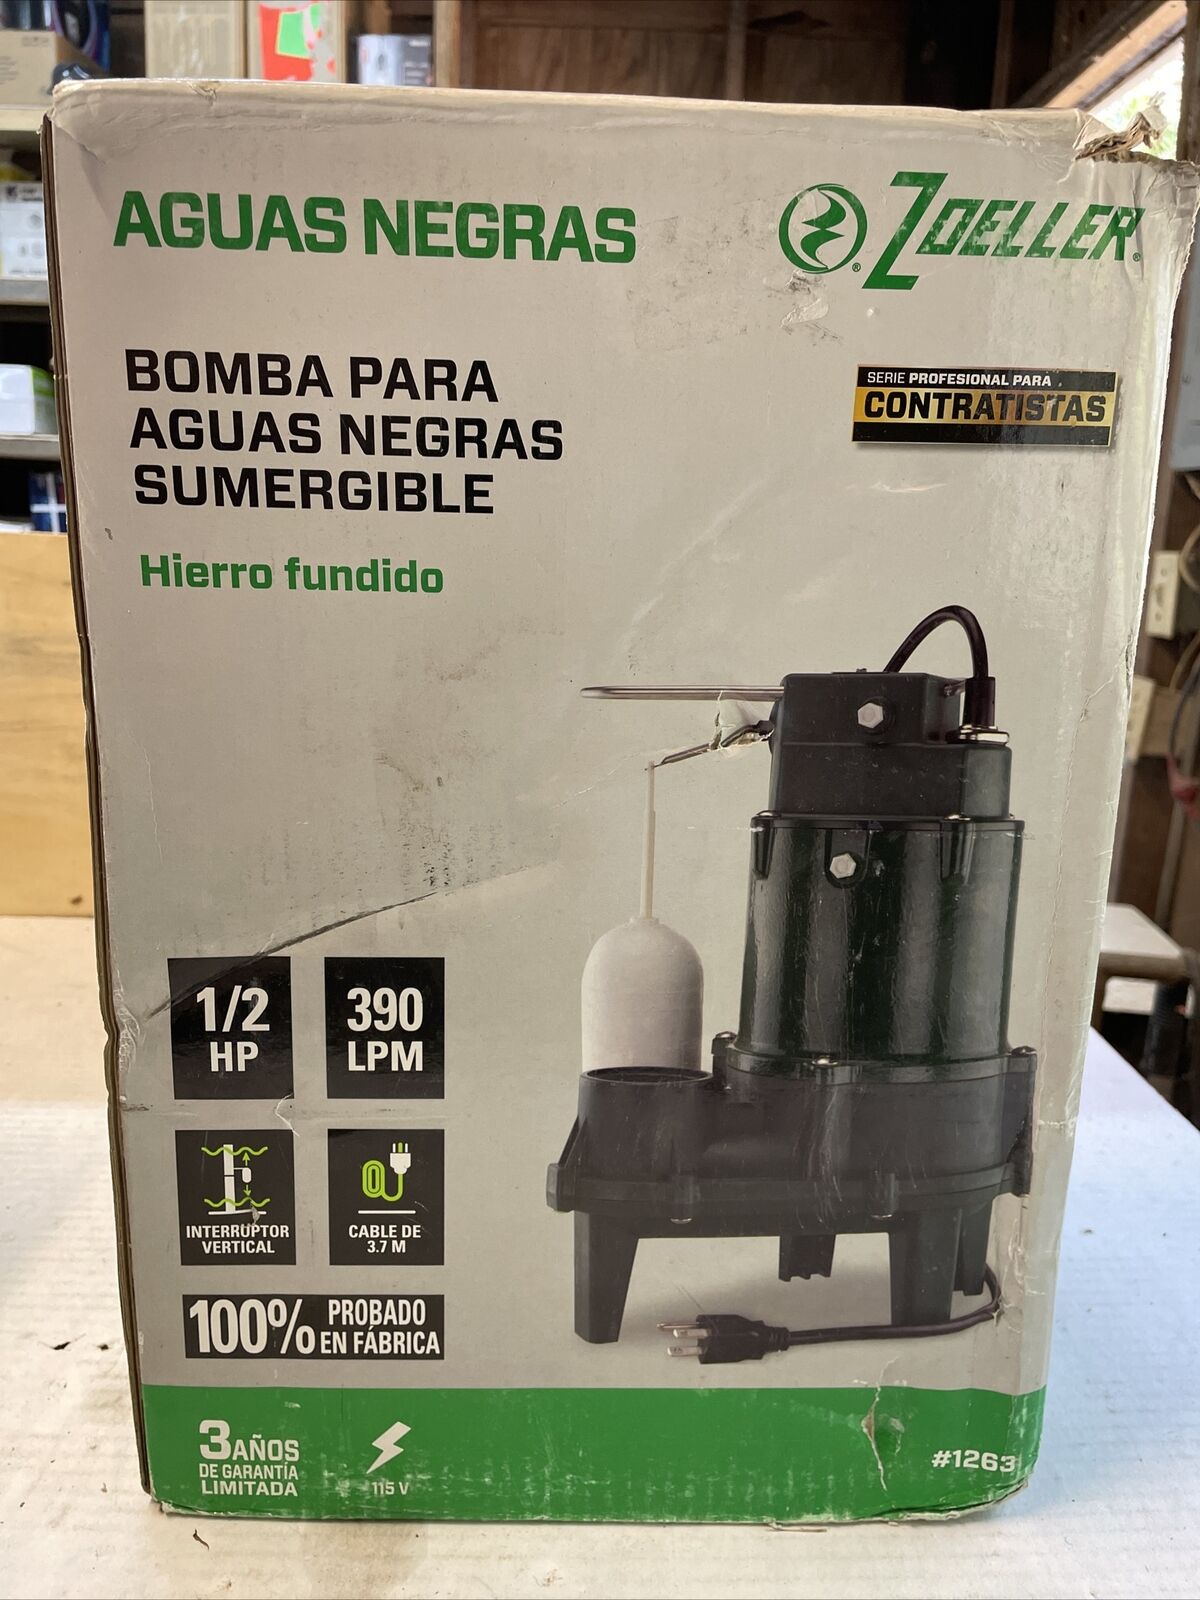 Zoeller 1/2 Hp Submersible Cast Iron Sewage Pump Open Box Never Used. 0086